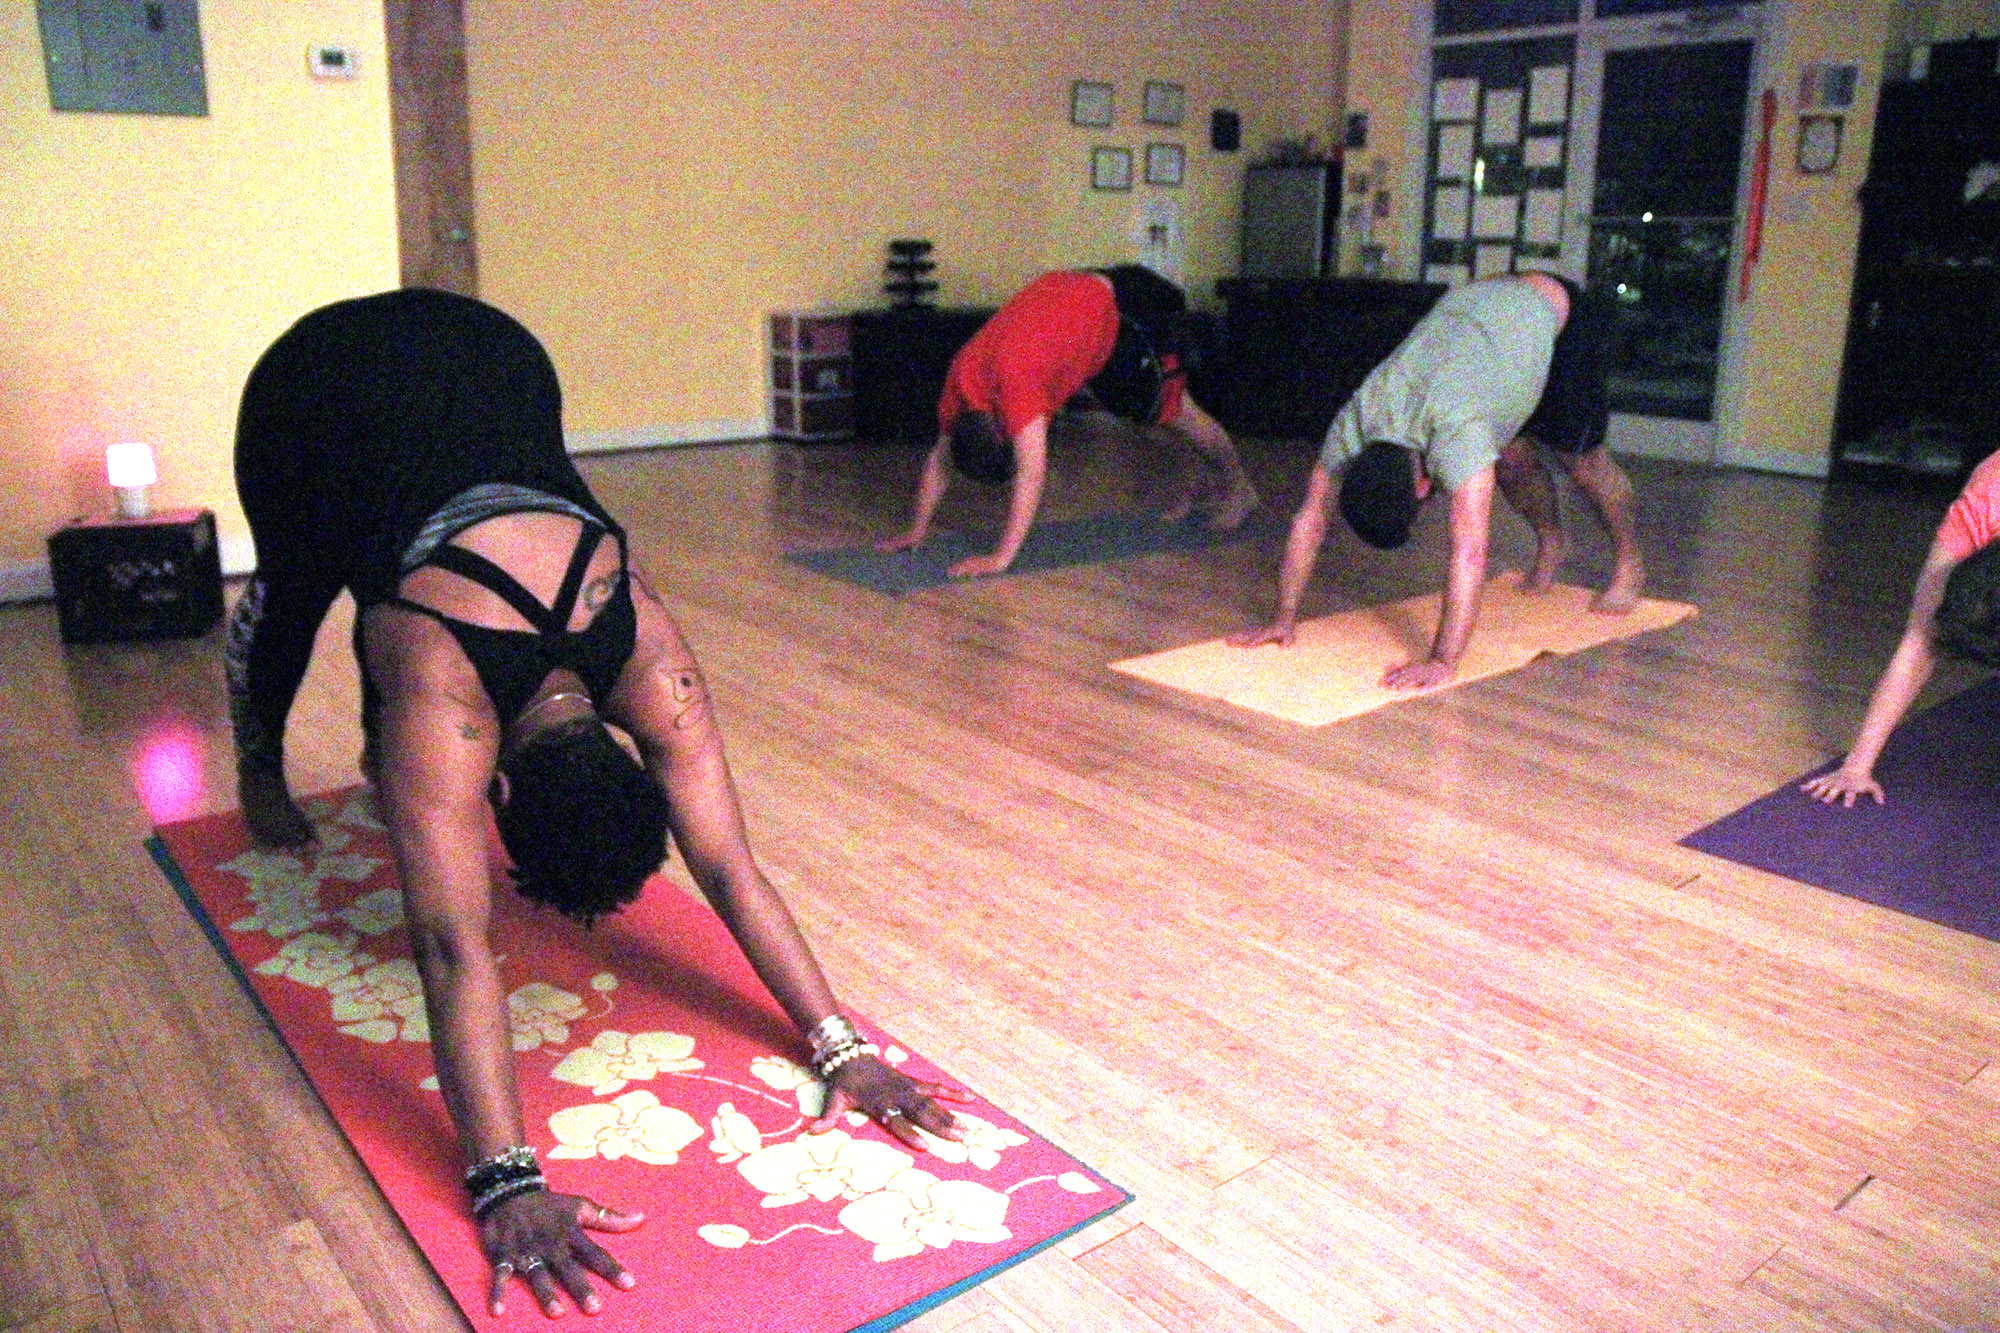 Ingrid Saddler-Walker demonstrates a common inversion yoga pose, Downward Facing Dog. This pose is great for increasing blood flow to the brain and eyes. It stimulates the nervous system to help with memory and concentration. (Staff photo by Diamond Gwynn)